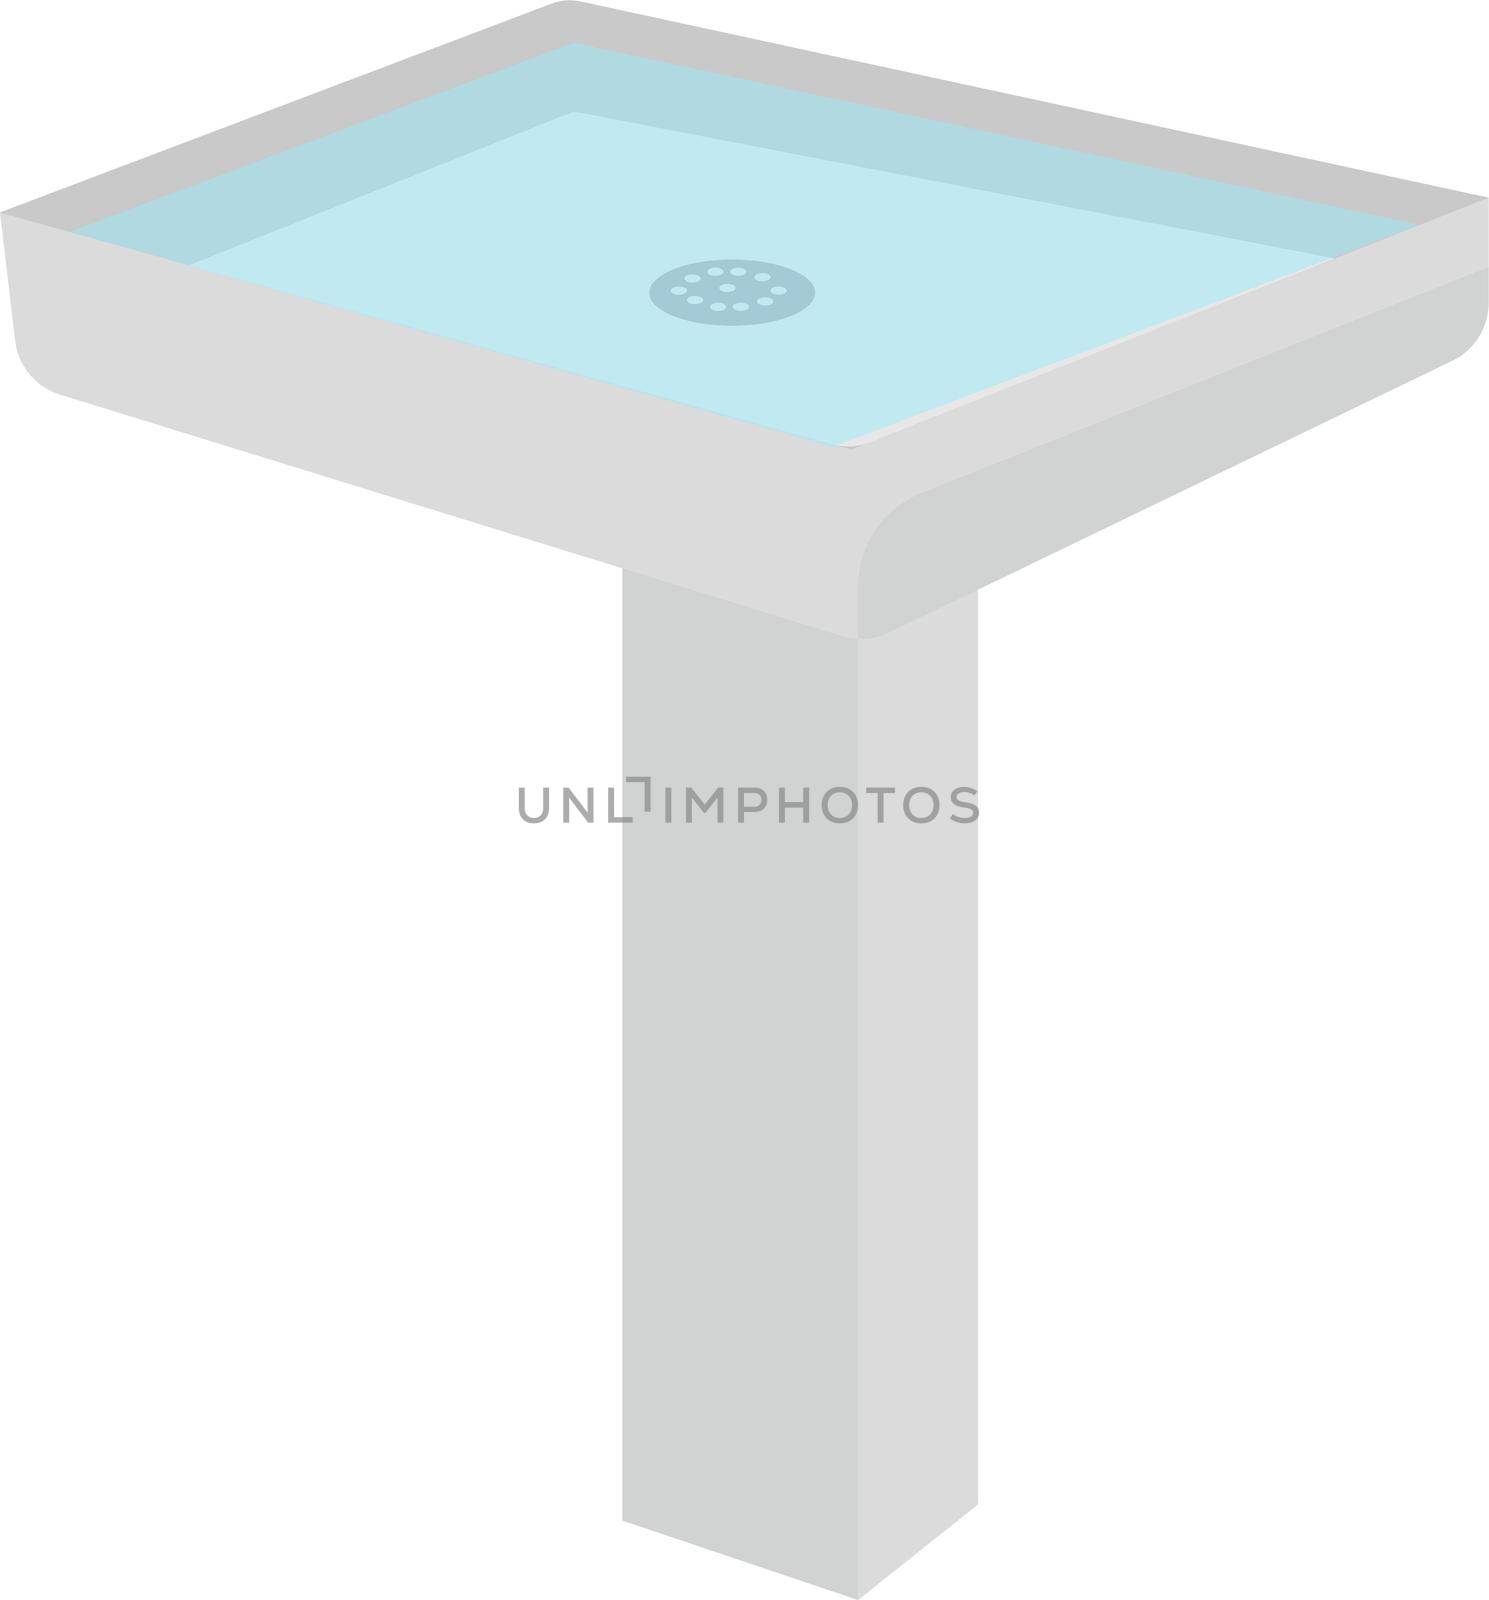 Sink with water, illustration, vector on white background. by Morphart